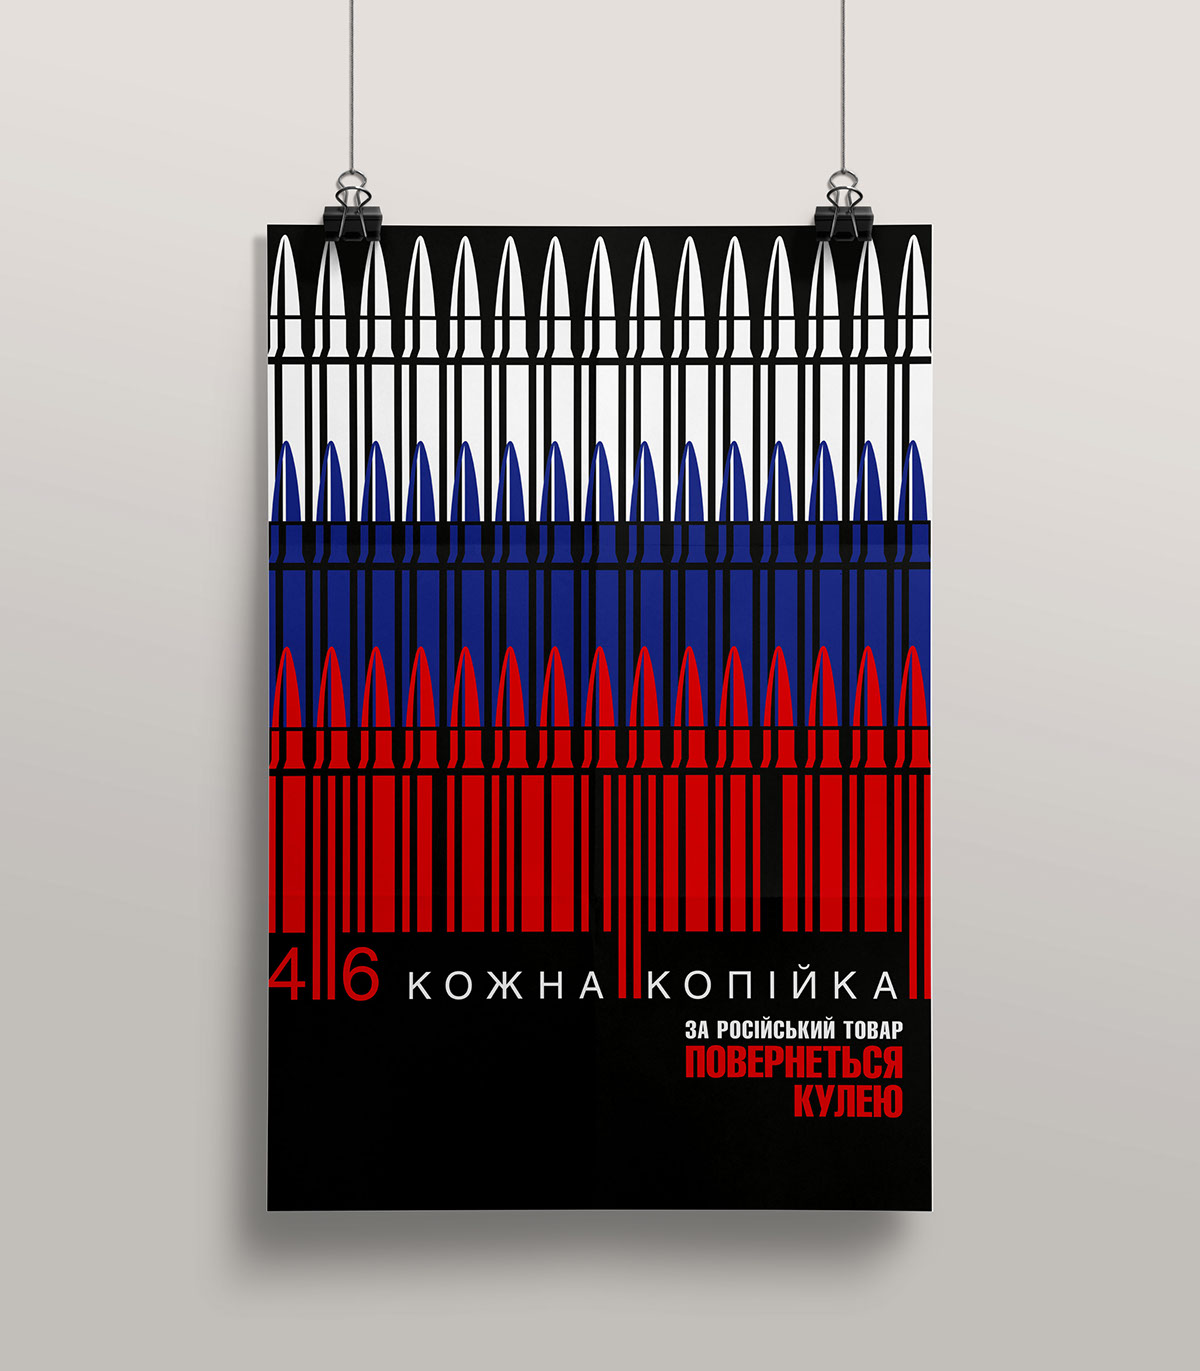 poster graphic design  russian aggression conflict Military army patriotic